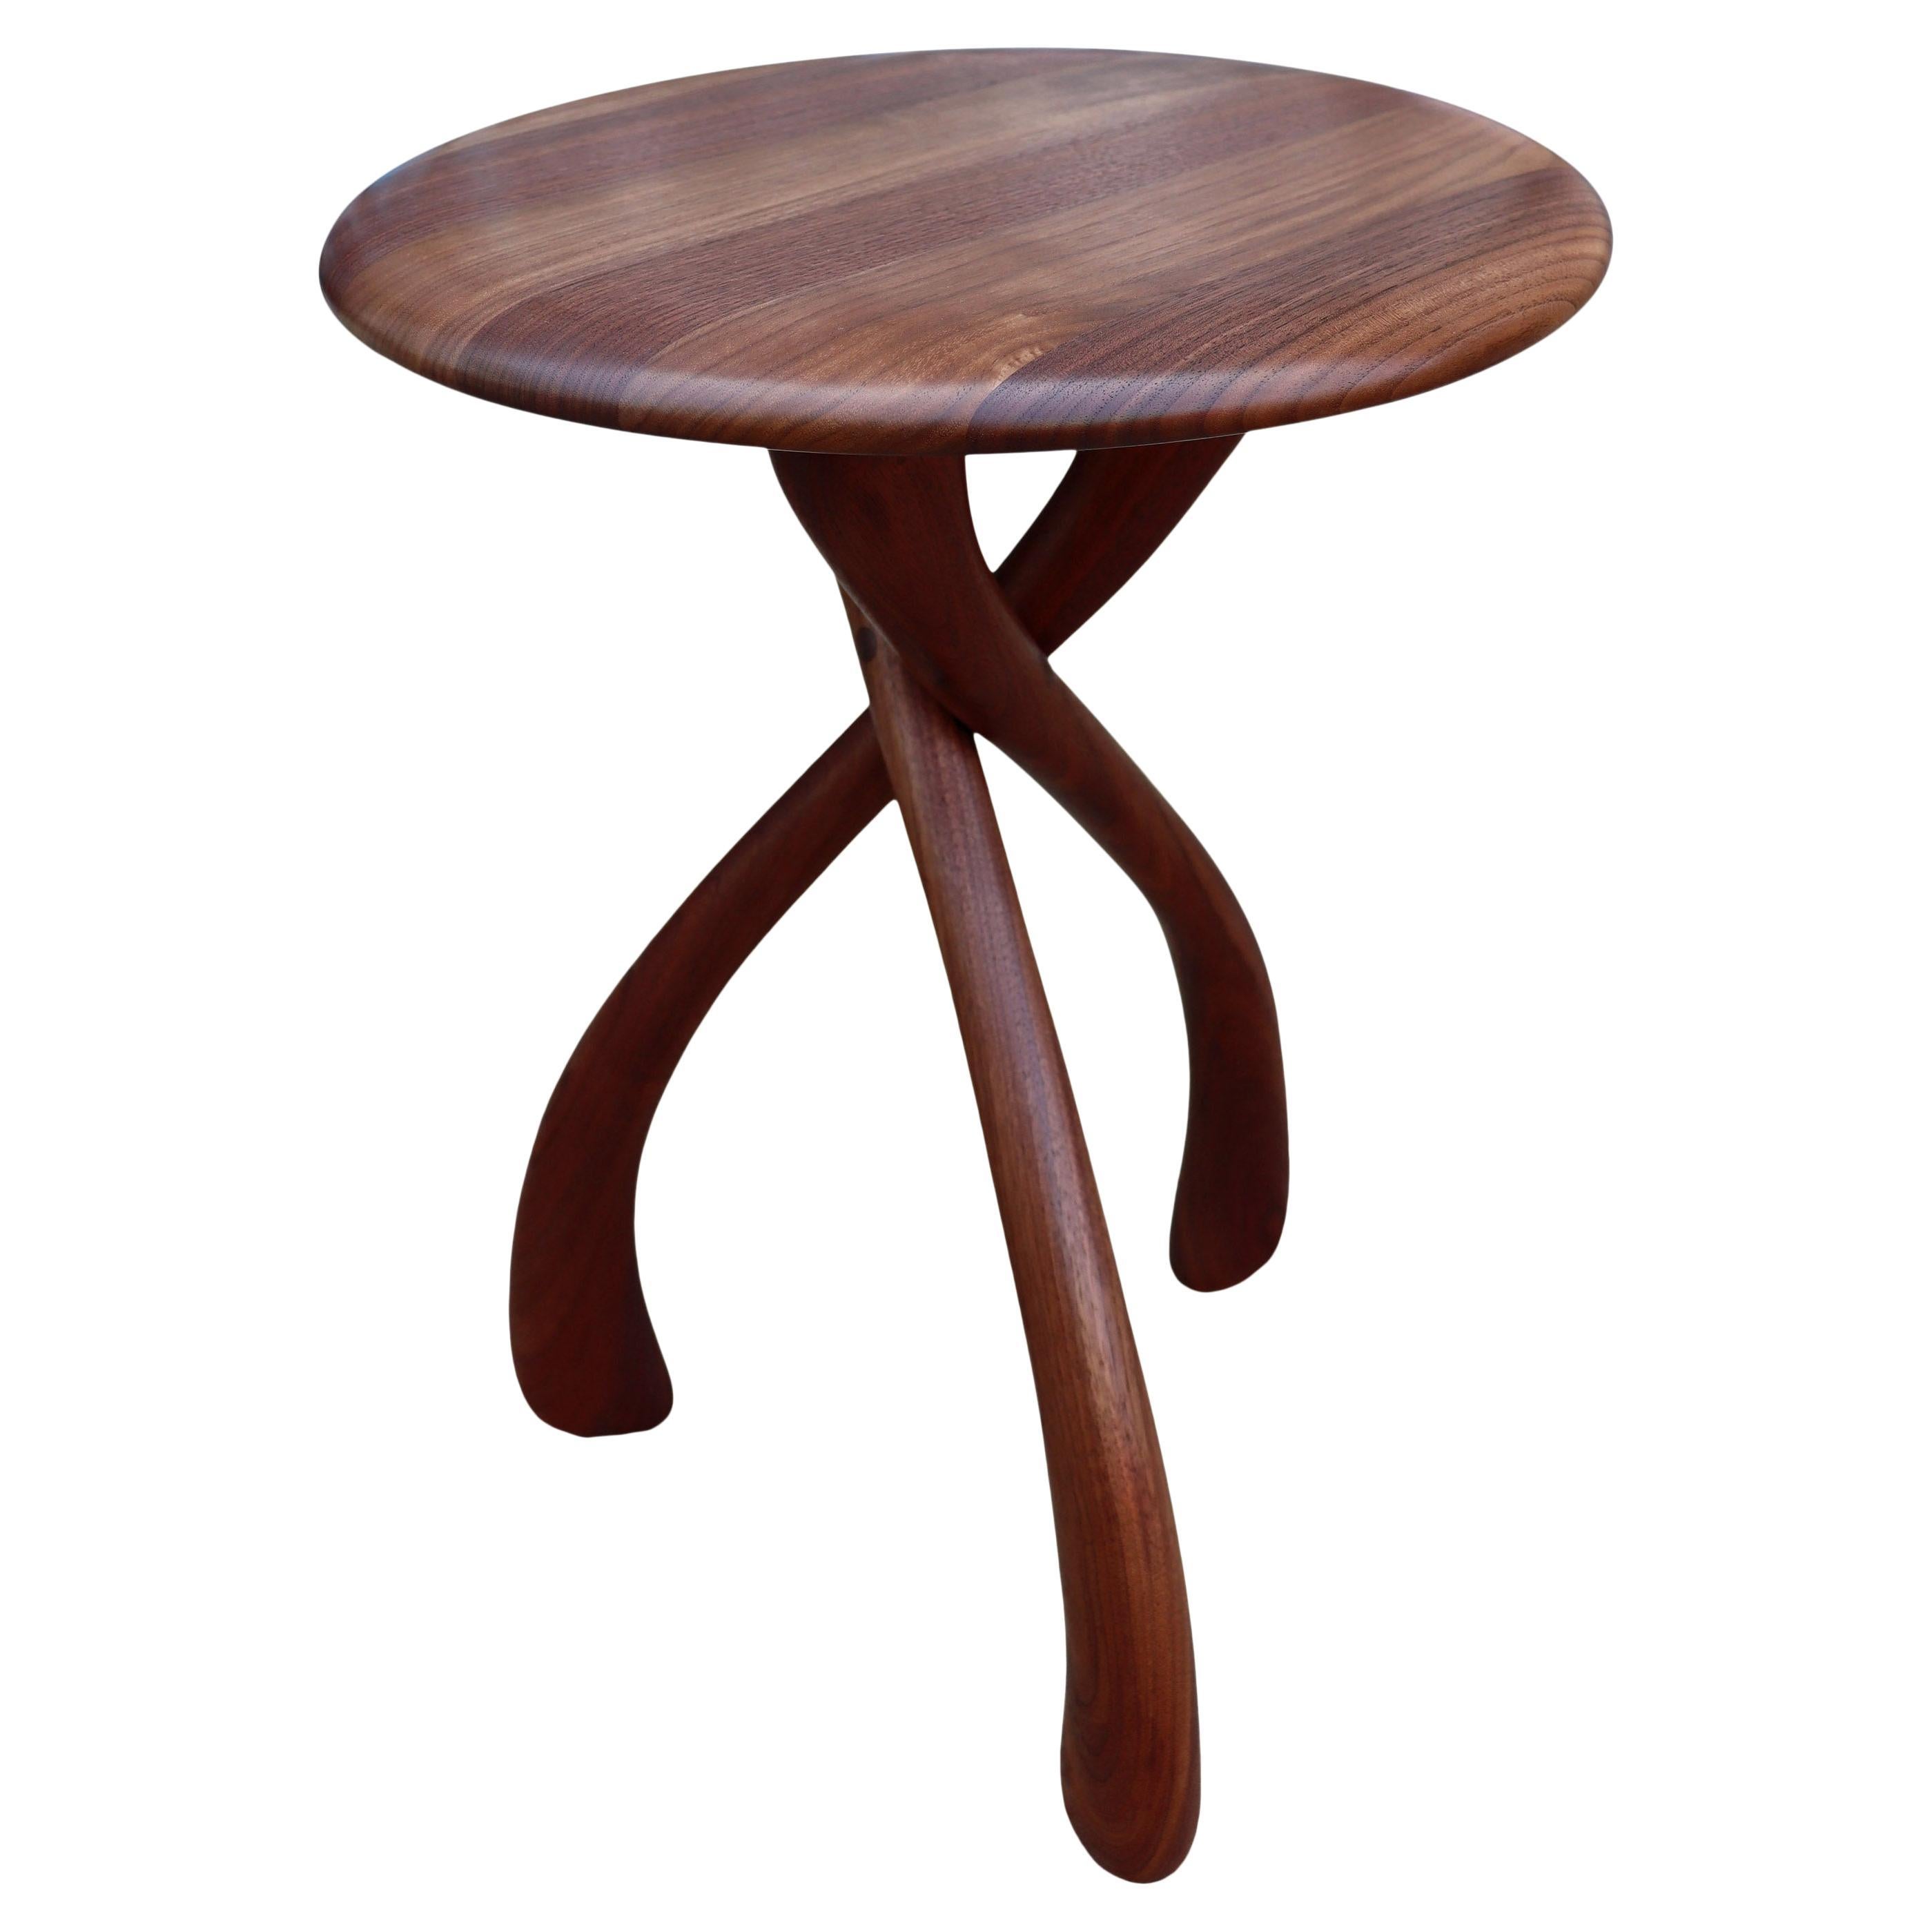 

Beautiful wishbone circular table designed by Dean Santner featuring black walnut construction. This amazing design looks simple yet complex at the same time. Wonderful proportions make great use as a side table, end table, bedside tables or